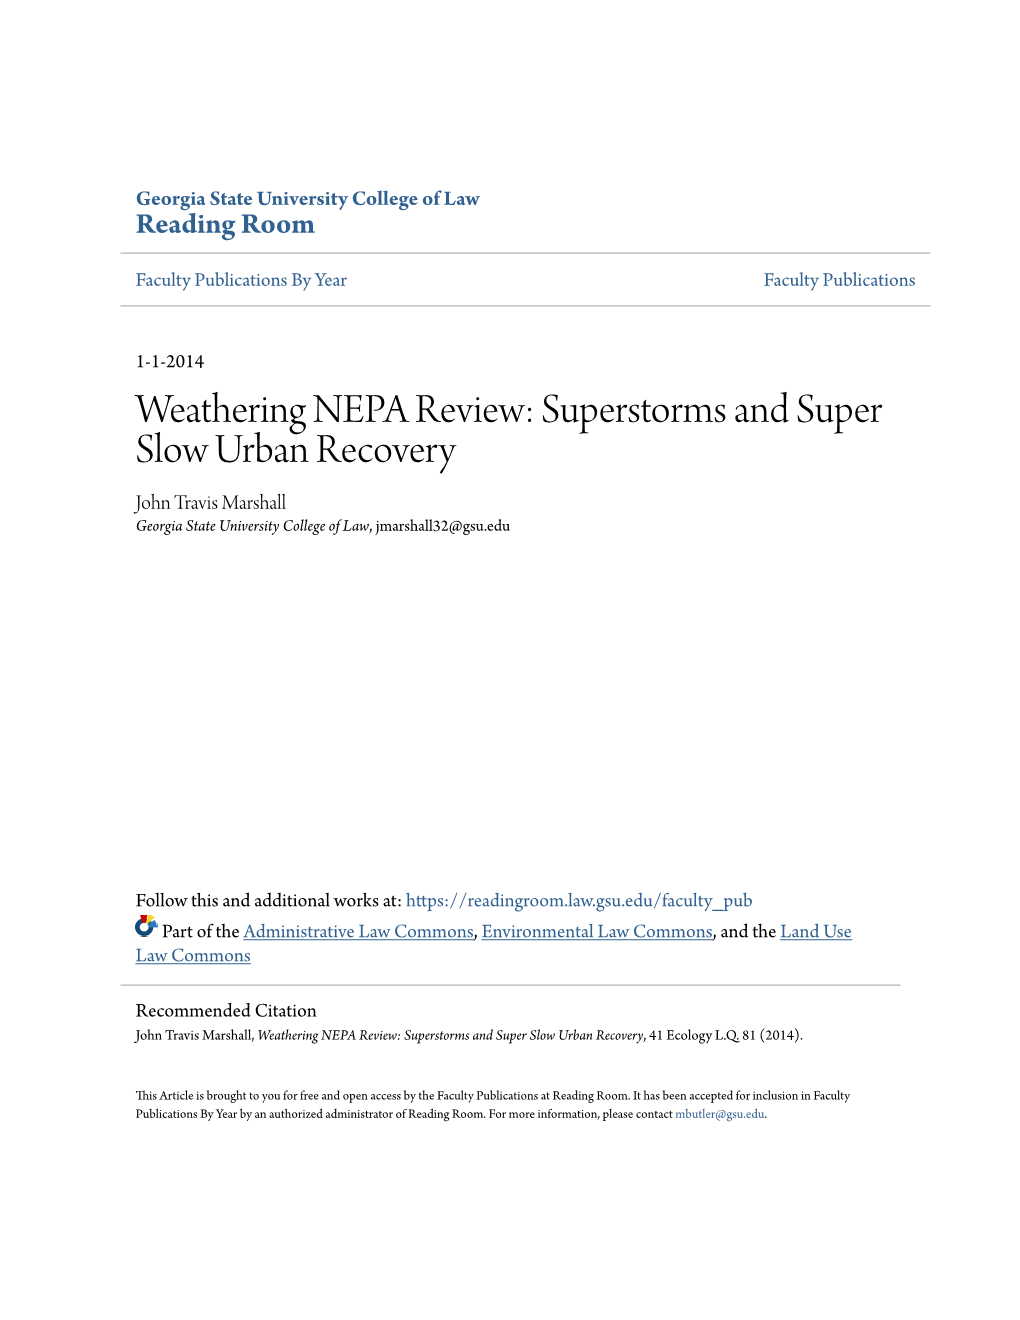 Weathering NEPA Review: Superstorms and Super Slow Urban Recovery John Travis Marshall Georgia State University College of Law, Jmarshall32@Gsu.Edu